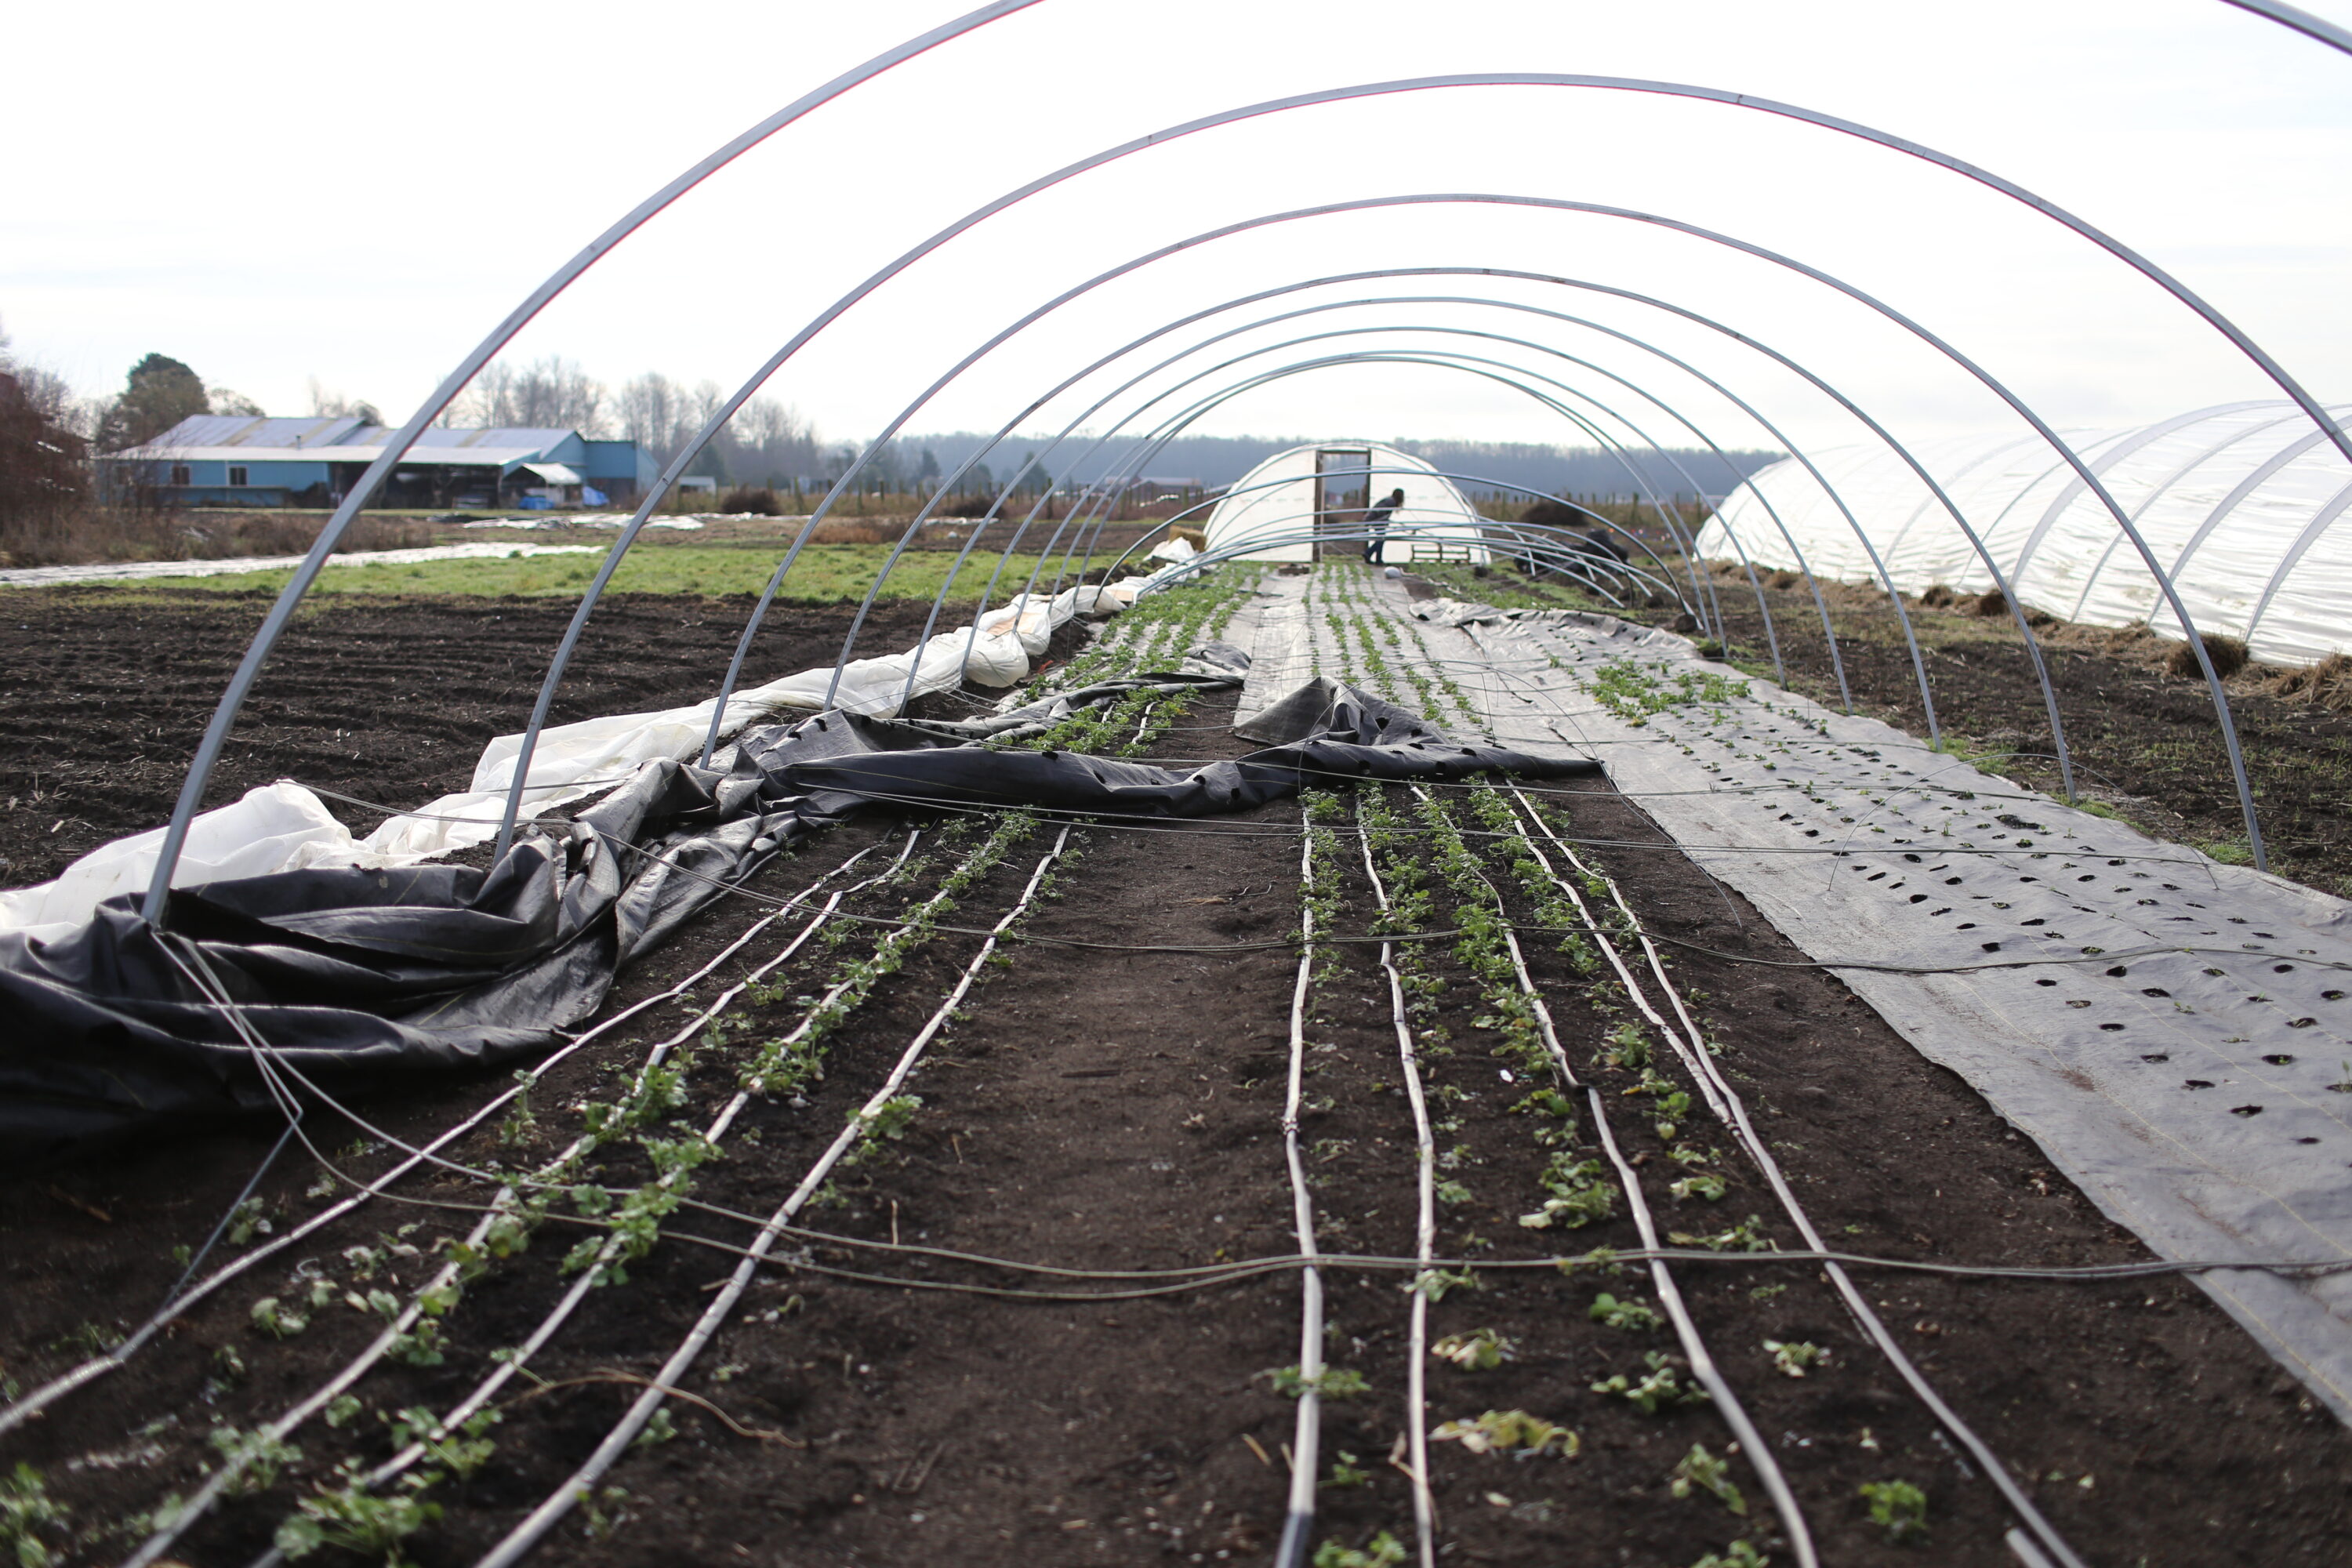 A hoophouse without plastic